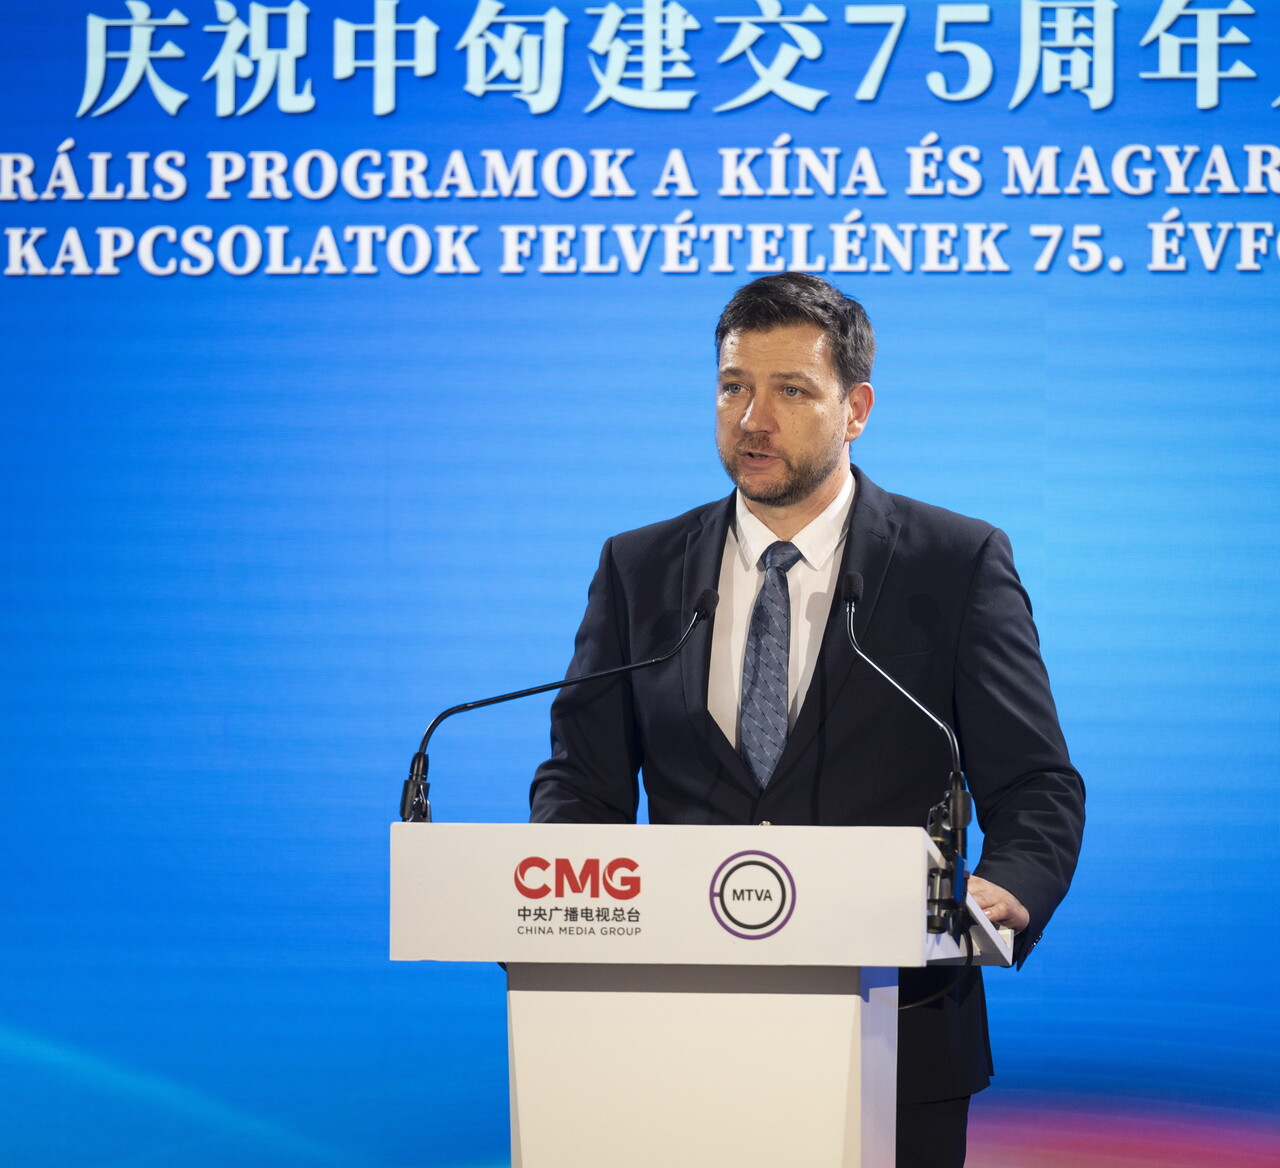 Hungary-China alliance example of harmonic cultural cooperation, says MTVA CEO